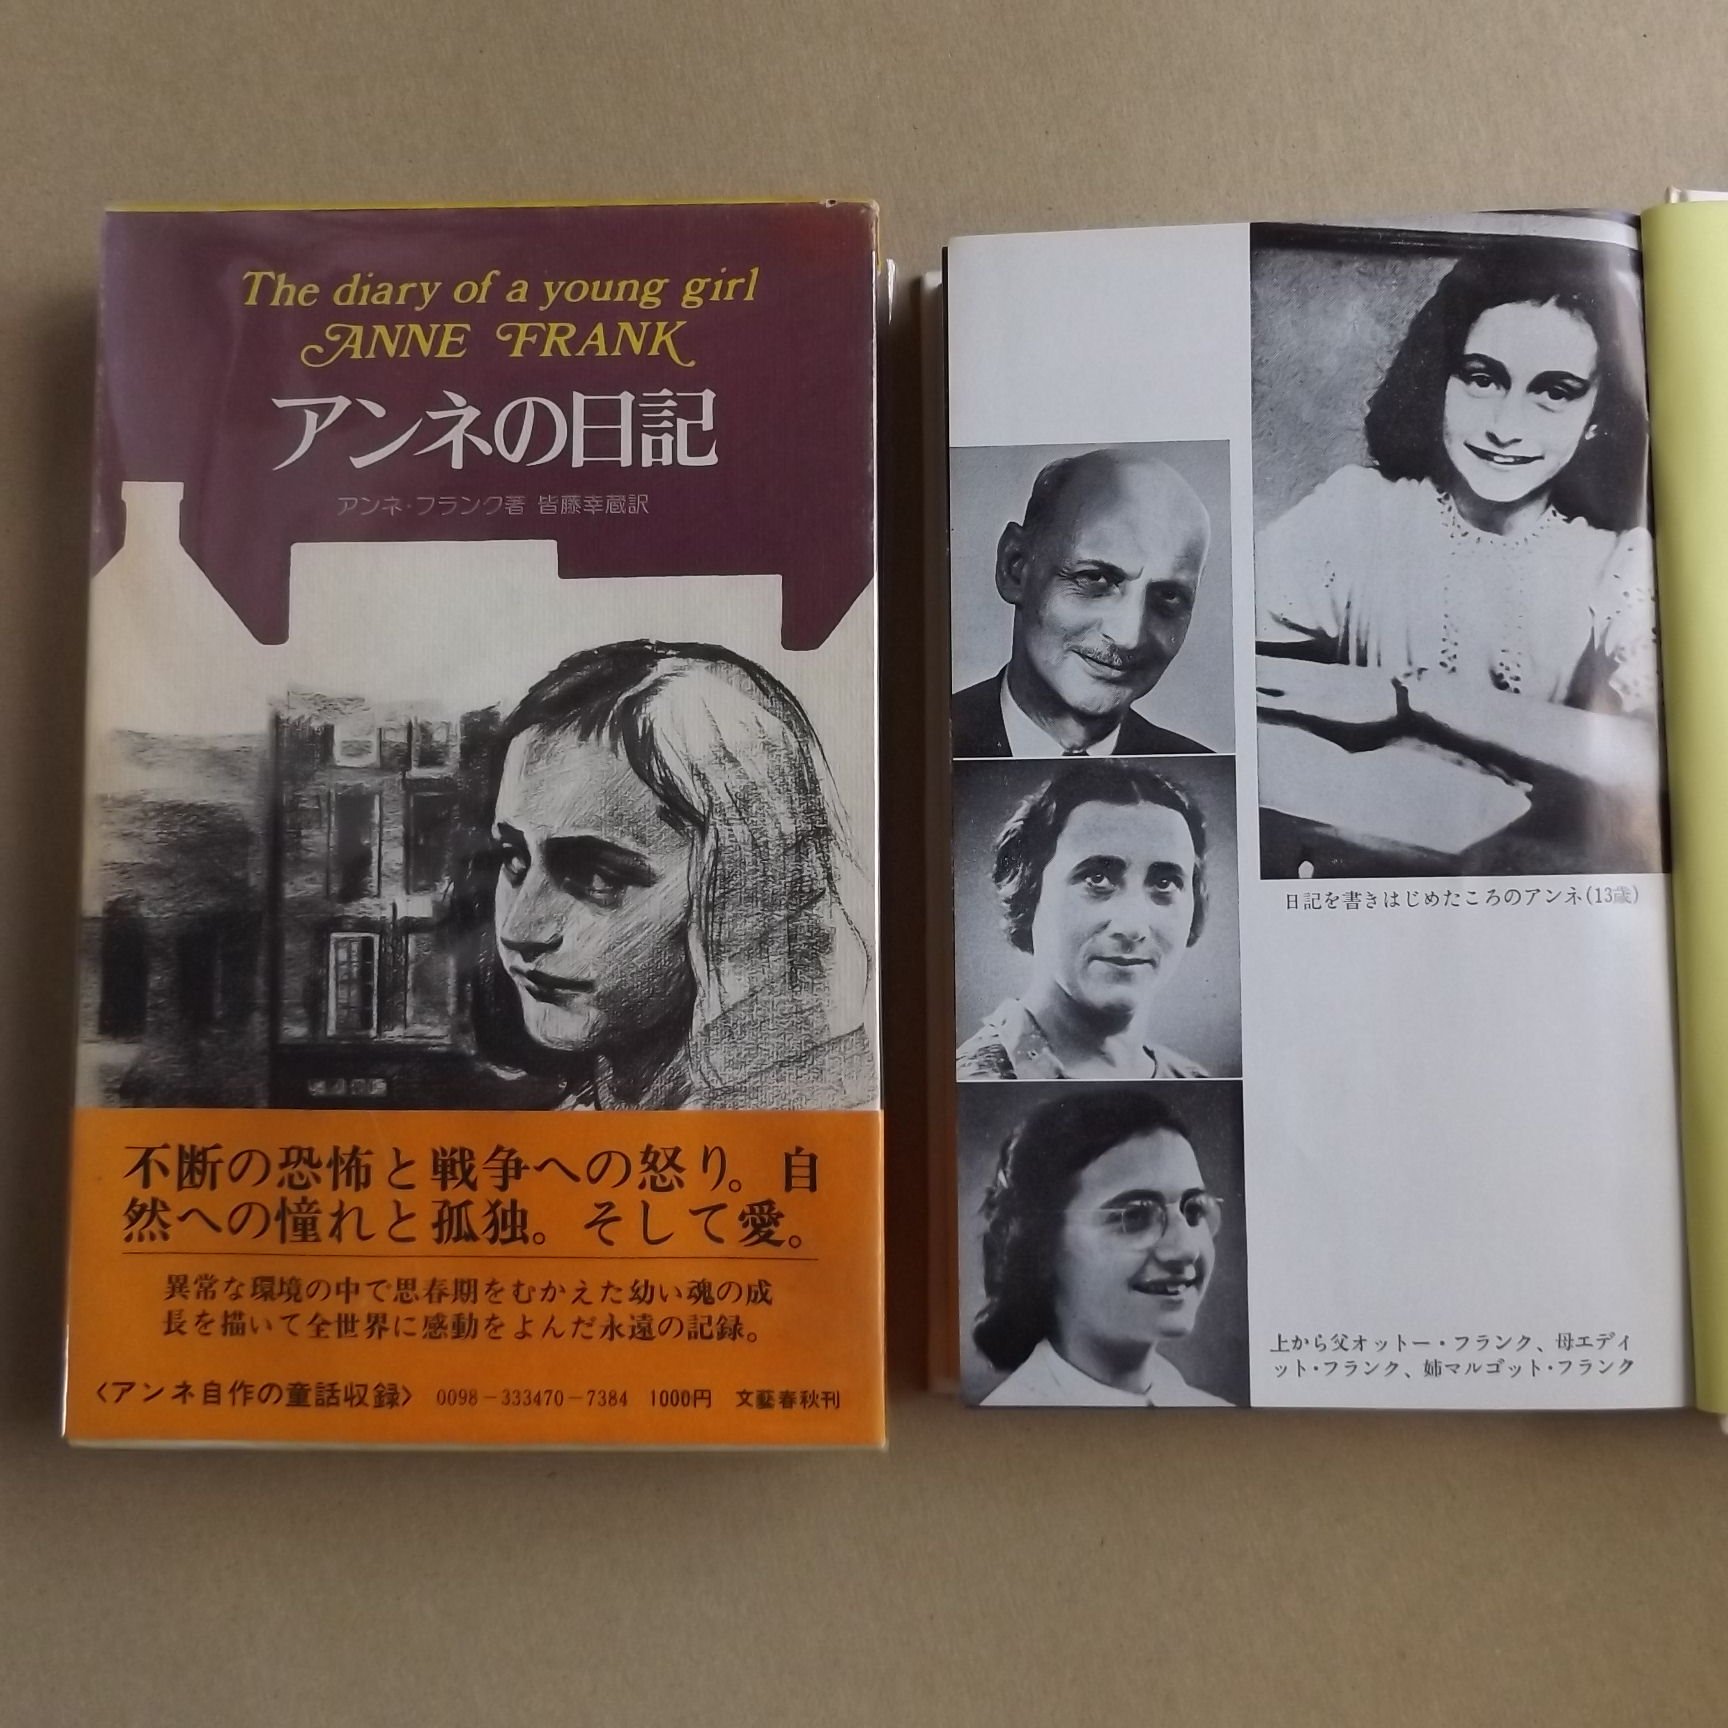 Anne Frank House Today It S Worldbookday Which Book Is Your Favorite Our Tip Diary Annefrank Womenmw T Co 7yoaowiw47 Twitter